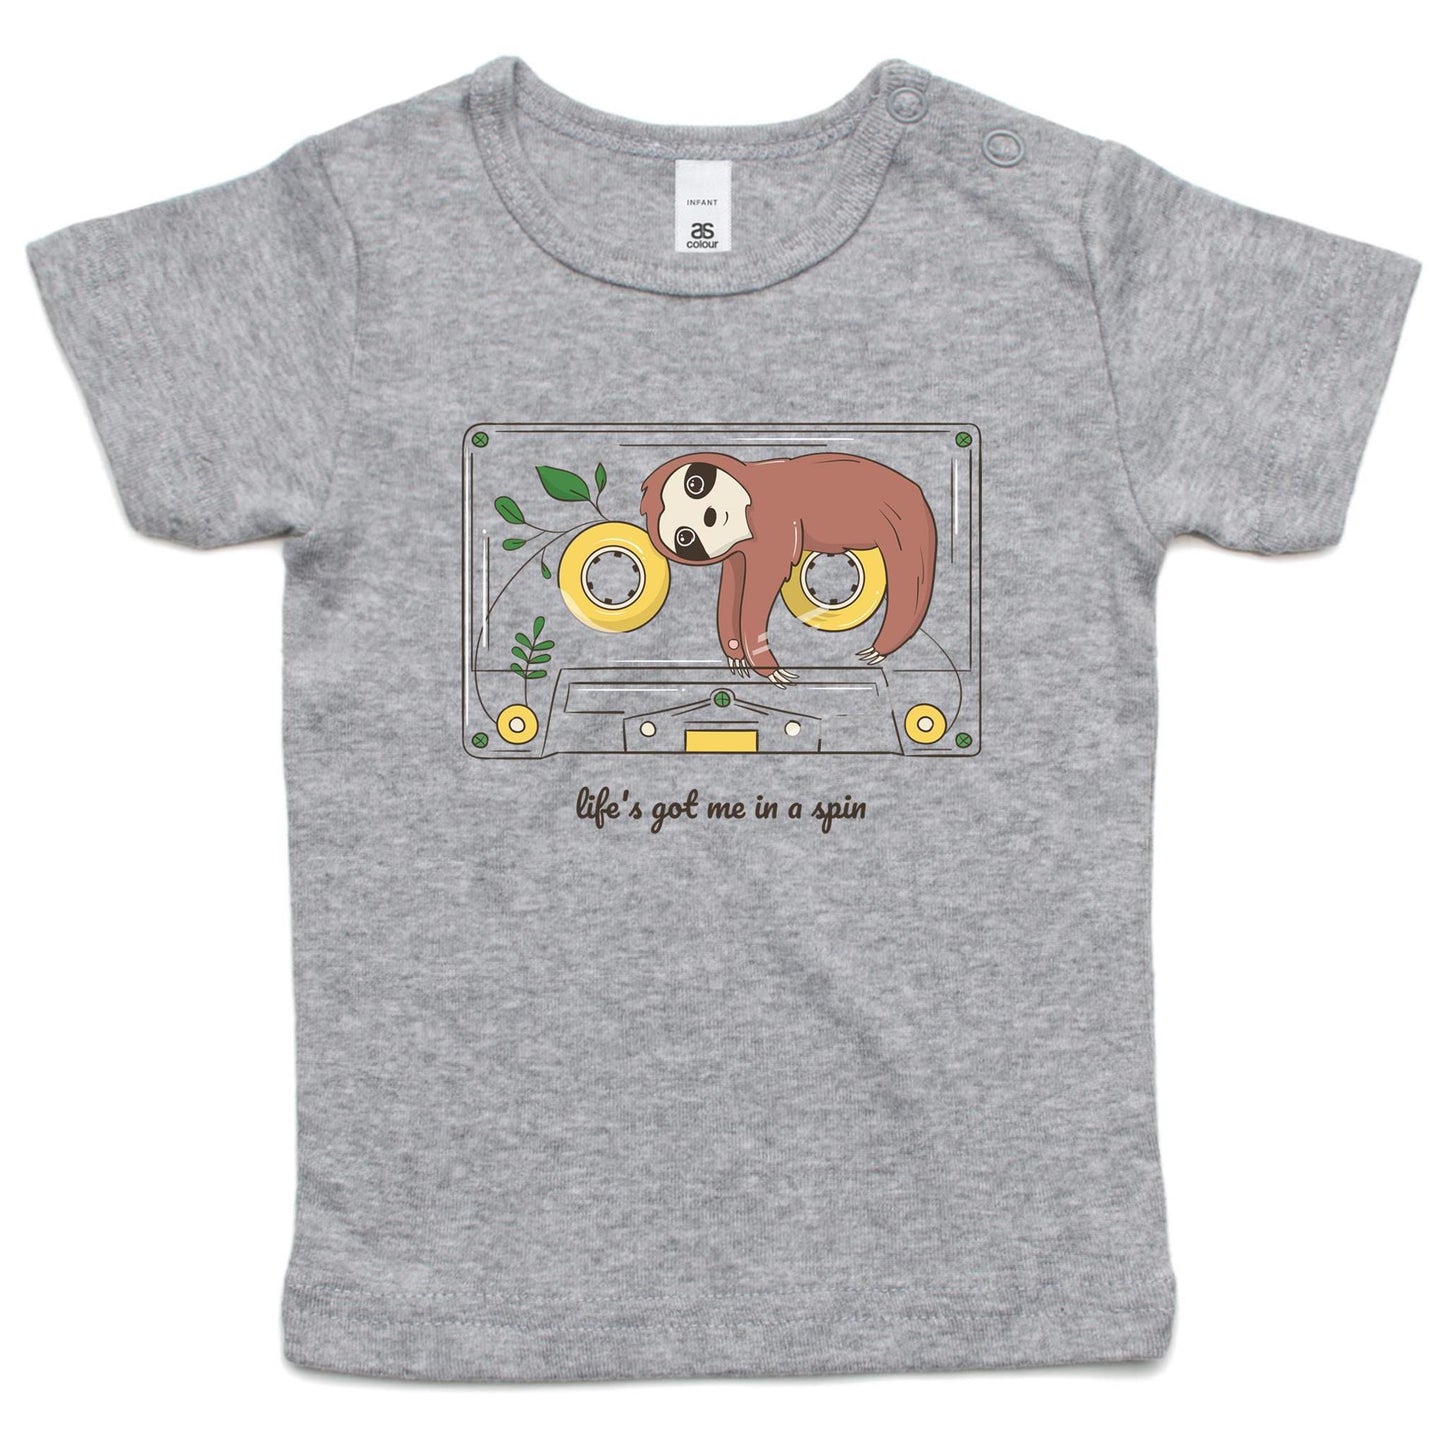 Cassette, Life's Got Me In A Spin - Baby T-shirt Grey Marle Baby T-shirt animal Music Retro